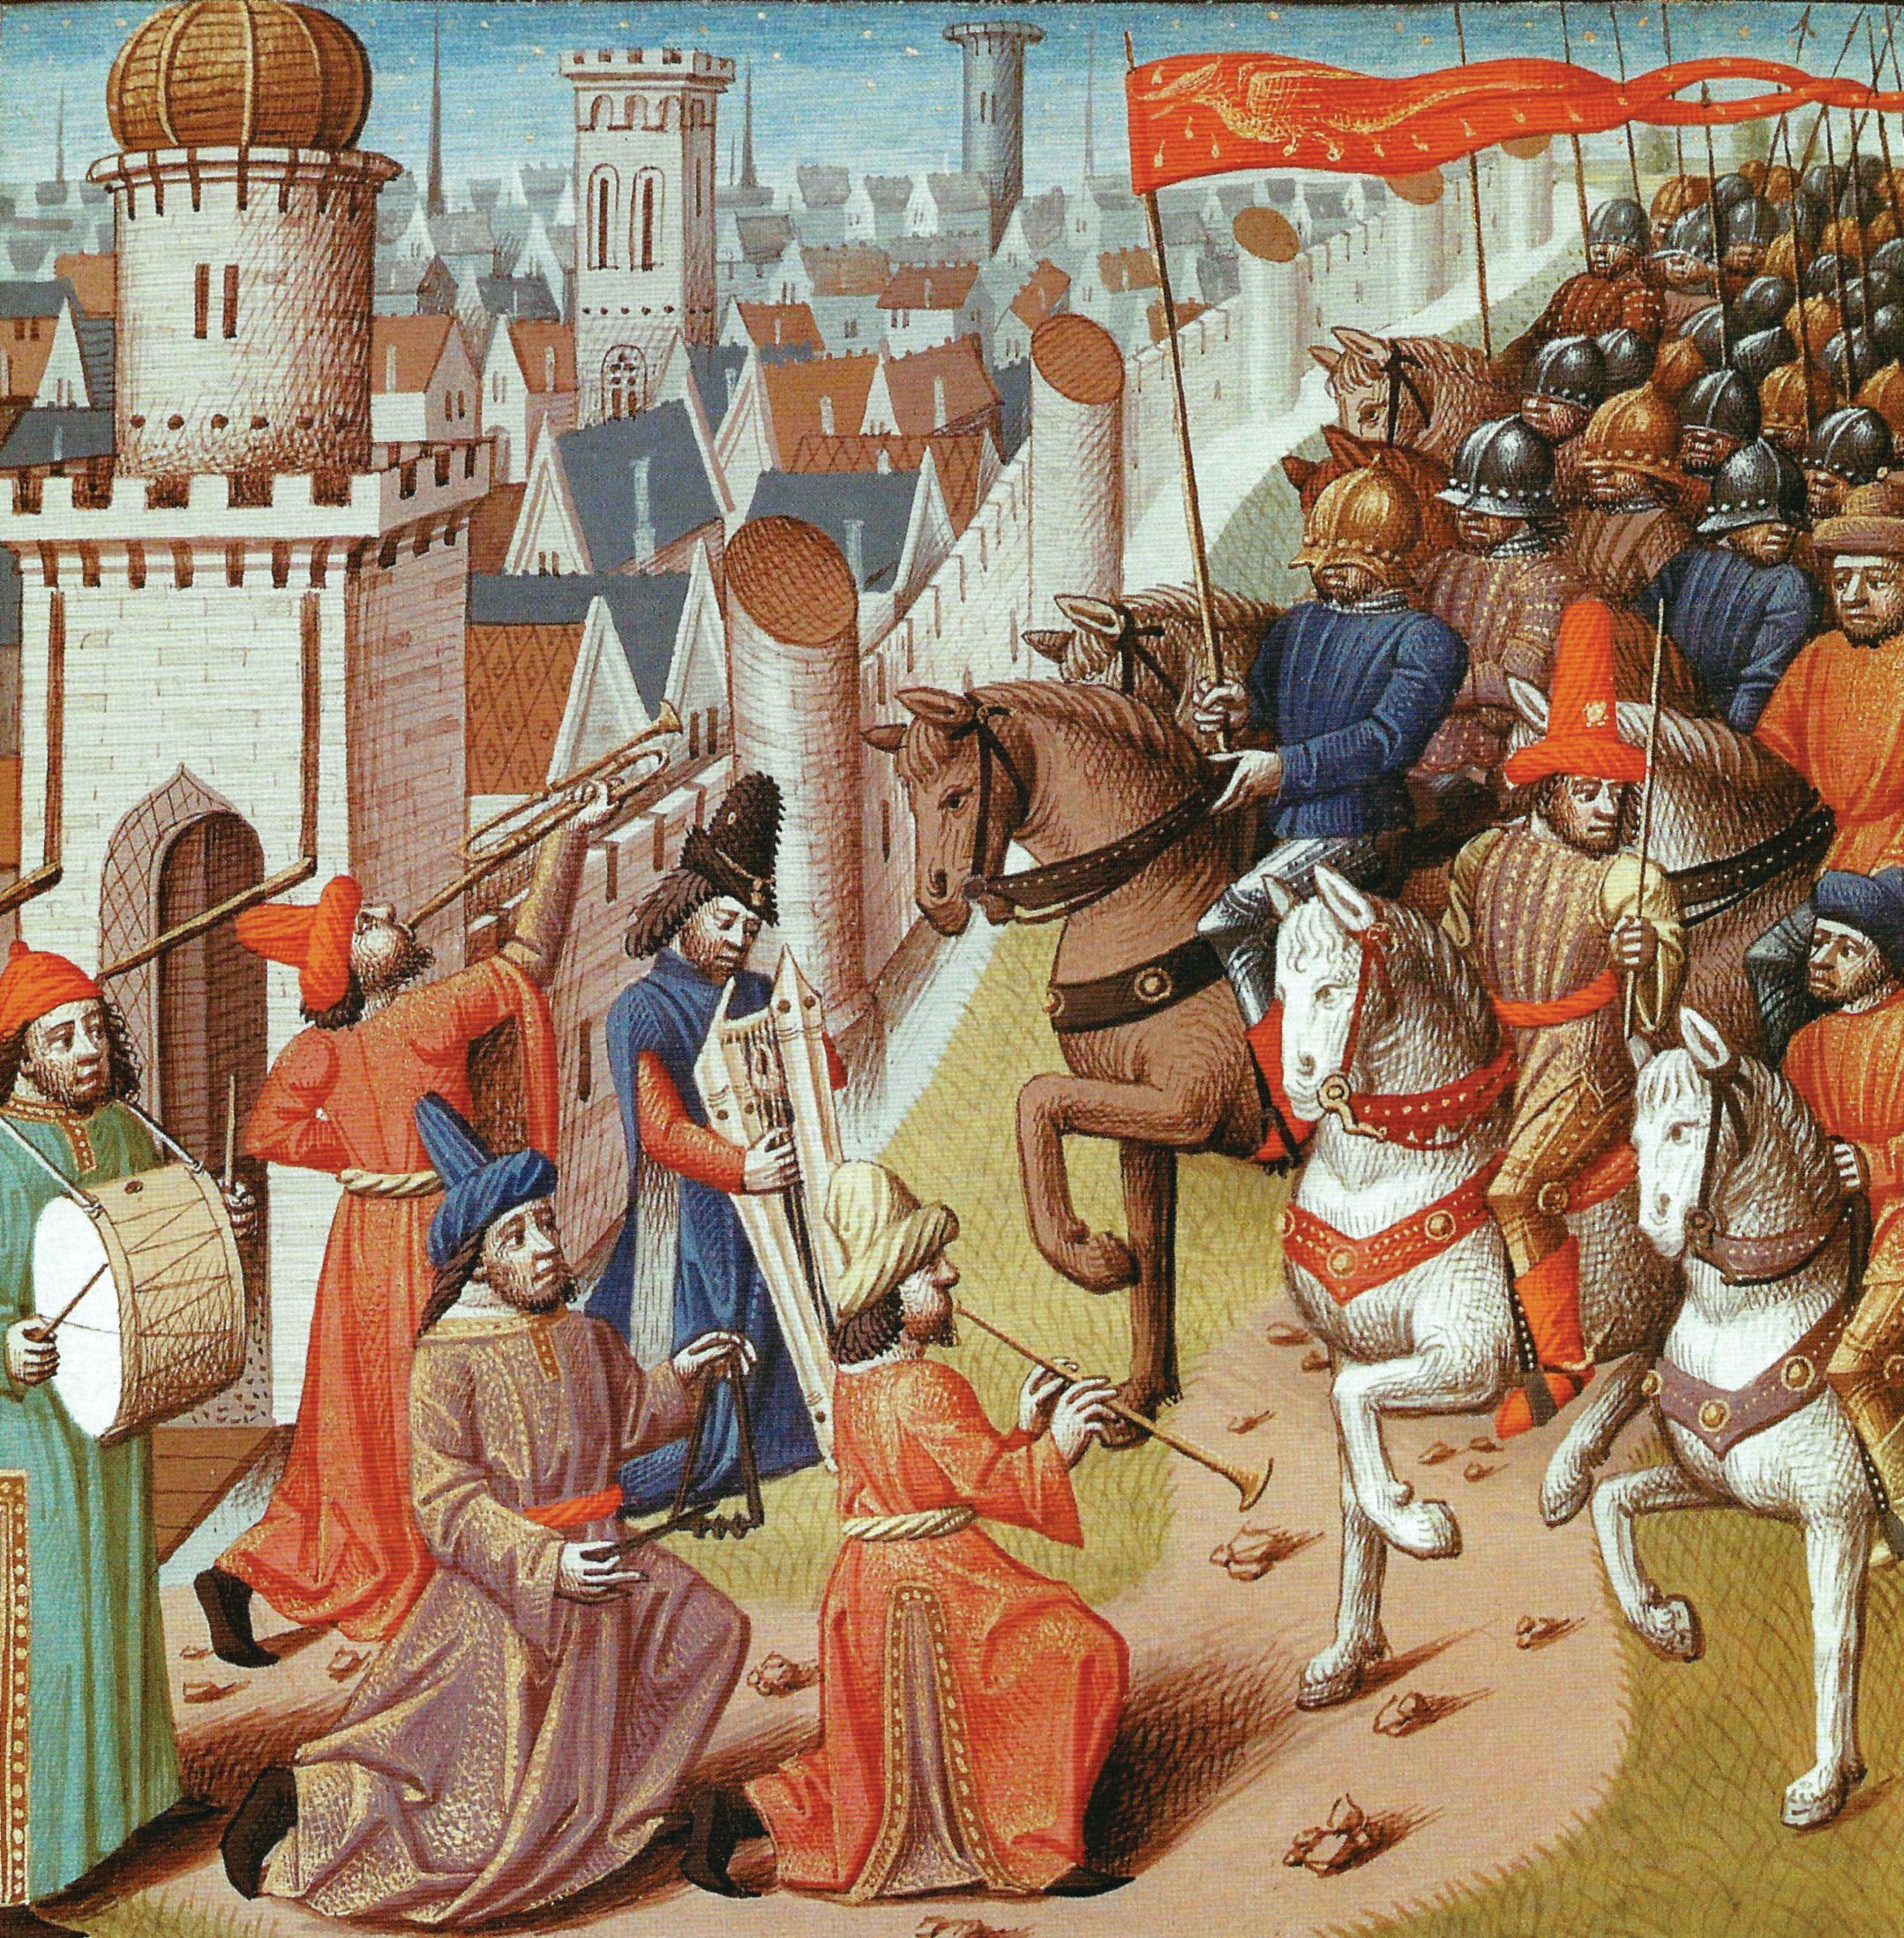 This medieval era painting depicts the crusader’s arrival at Damietta, with the Egyptian inhabitants greeting the French King Louis IX and his troops with music and fanfare. In reality, most of the Egyptian soldiers and the civilian population had fled.